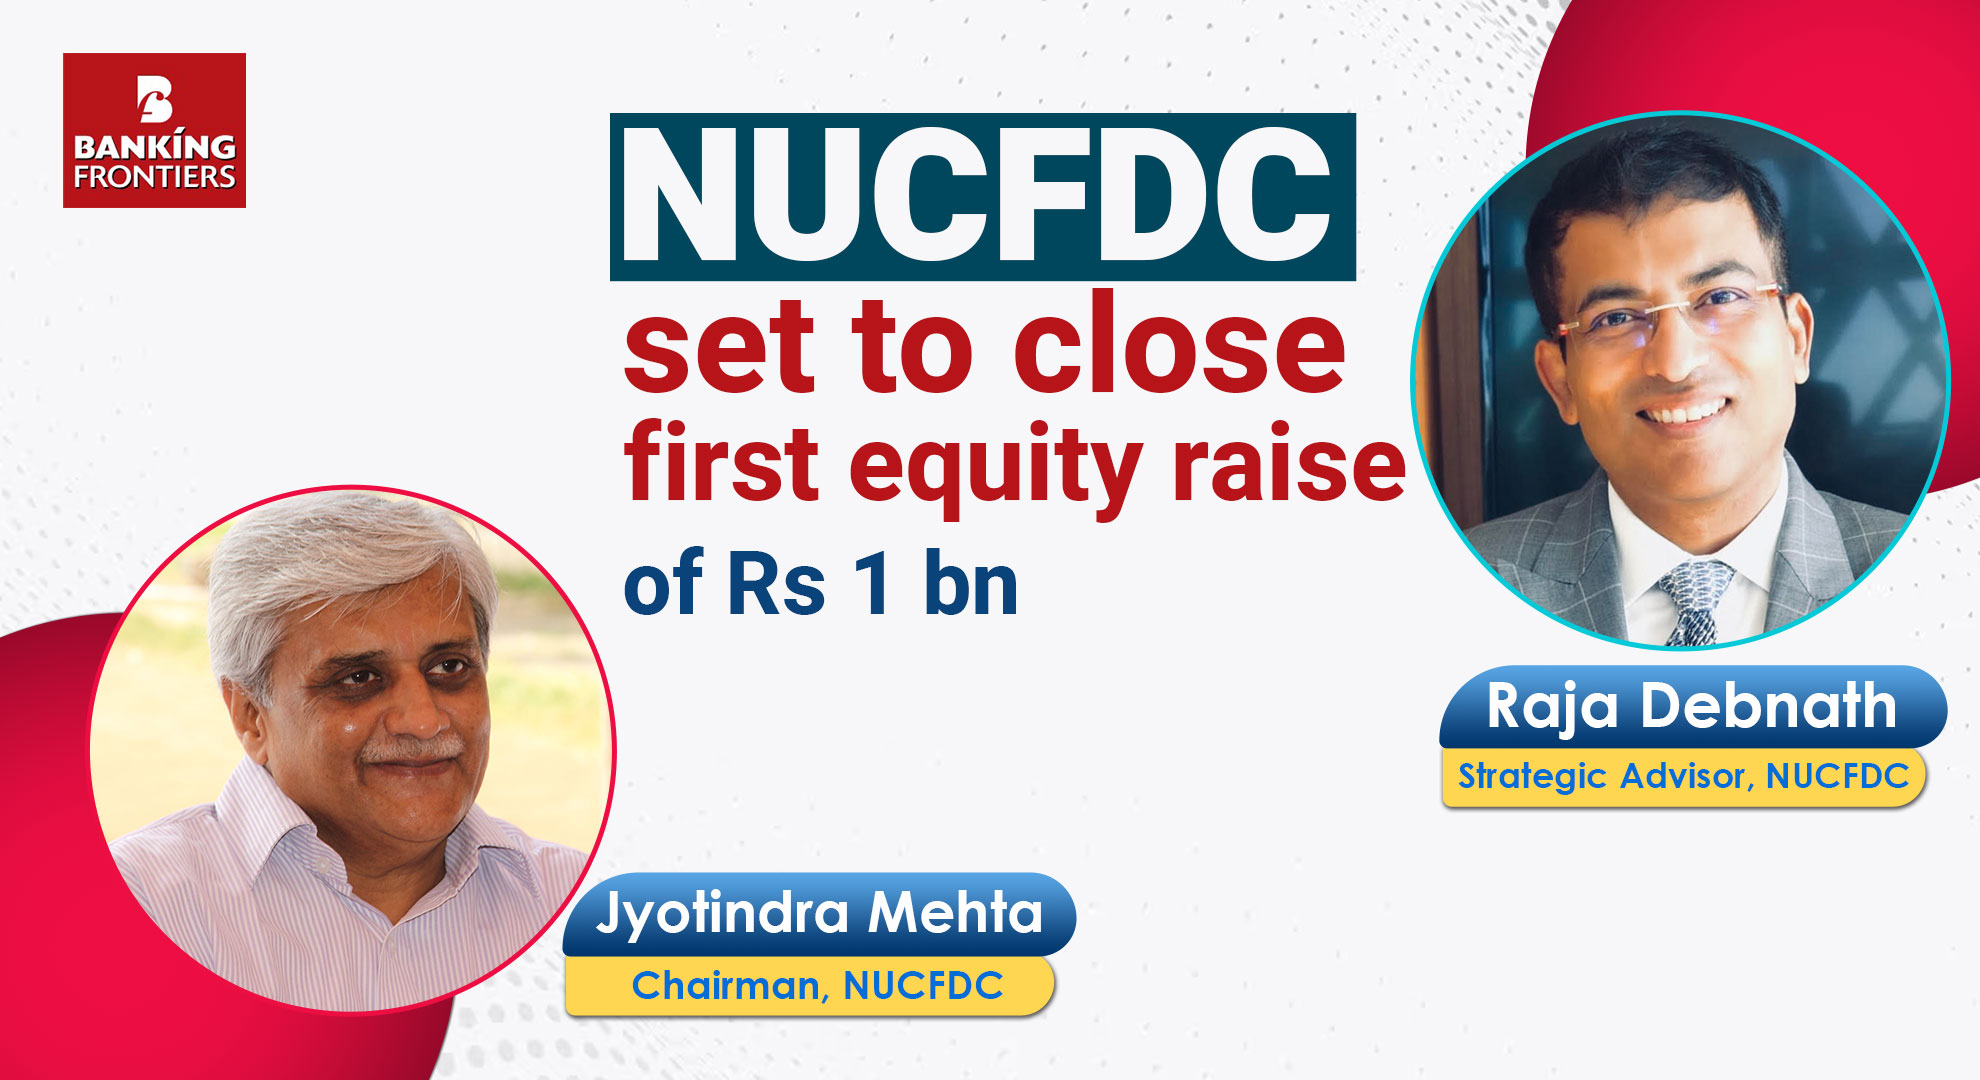 NUCFDC set to close first equity raise of Rs 1 bn 